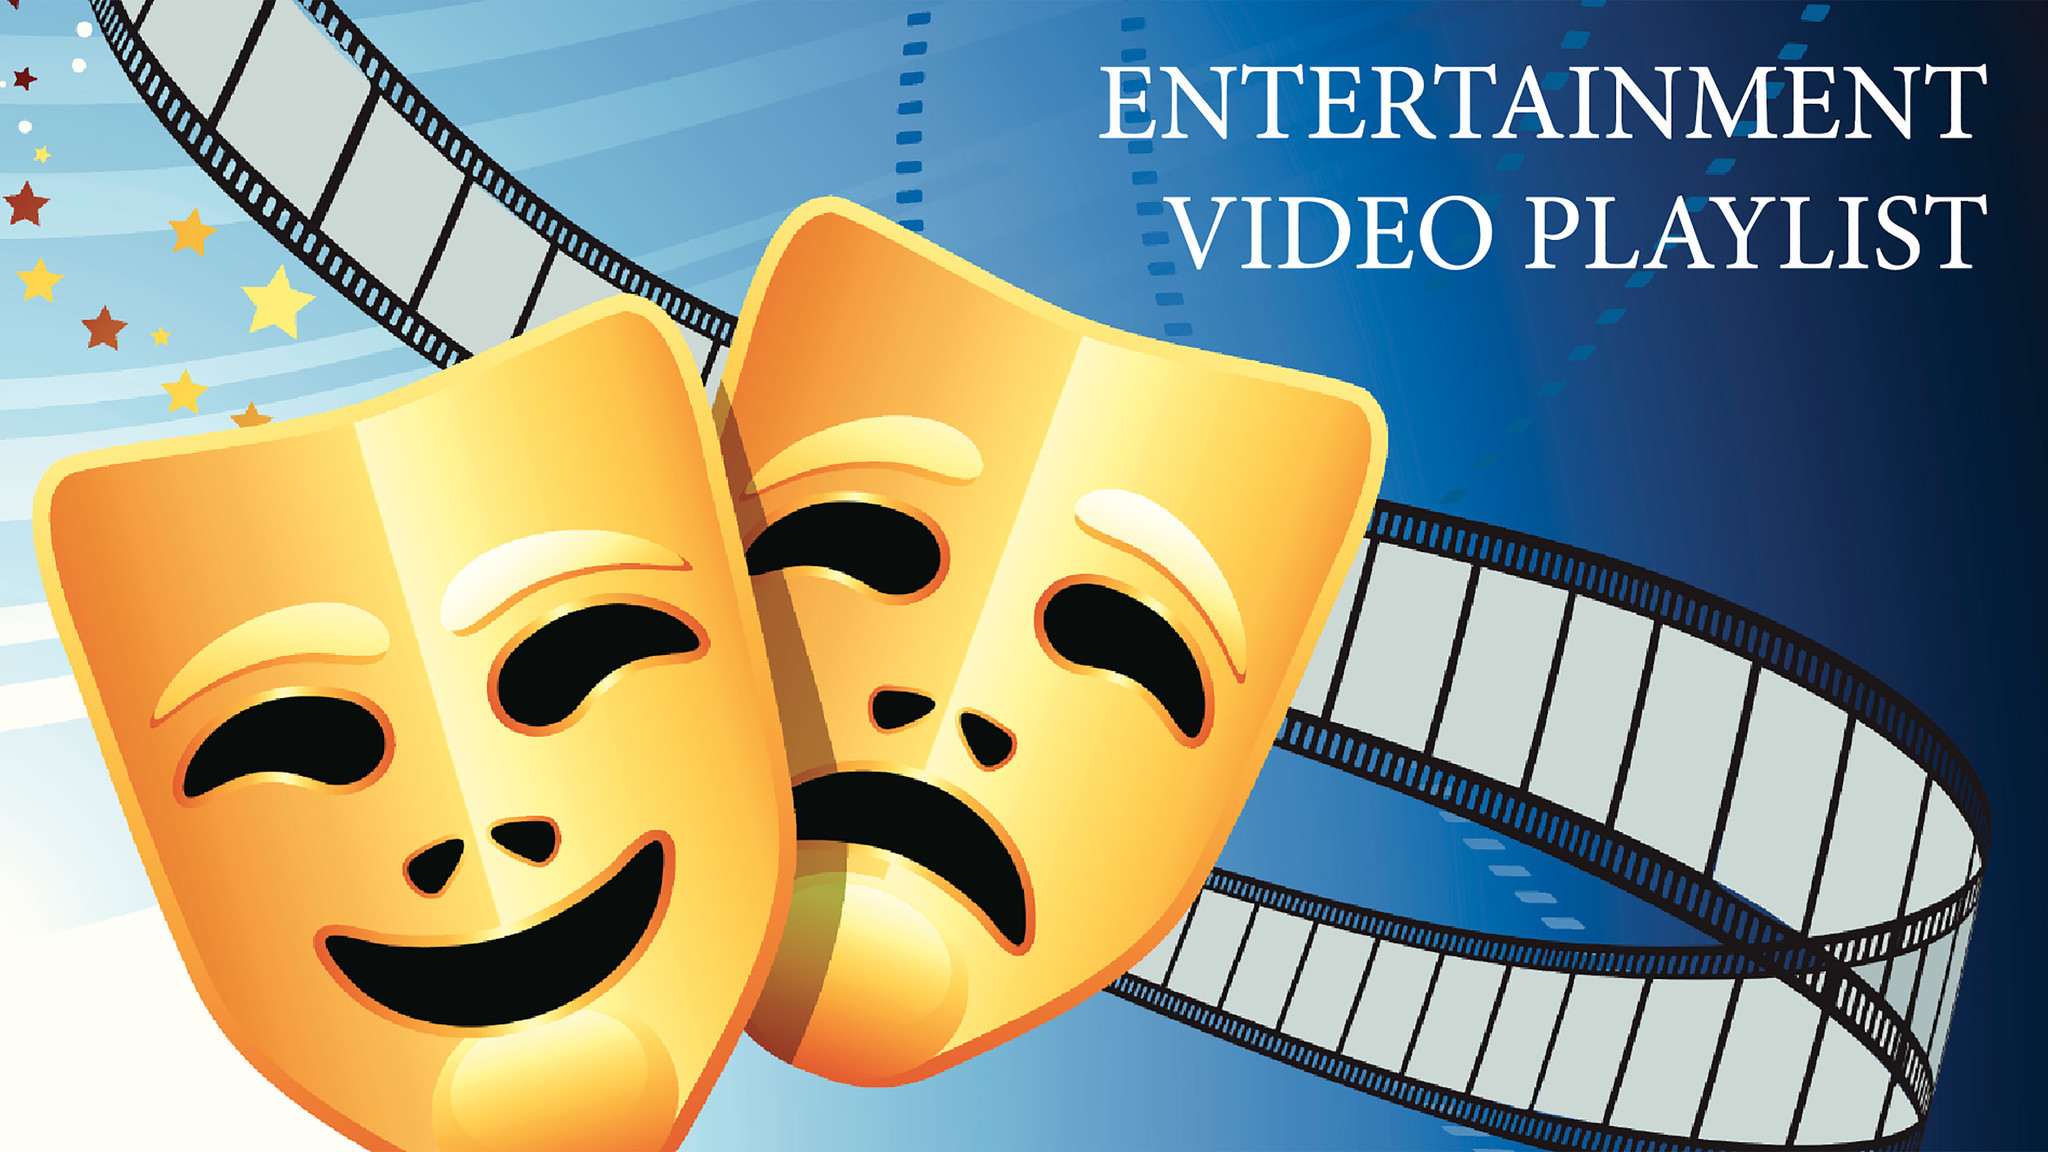 Entertainment industry set for $160 billion hit from 